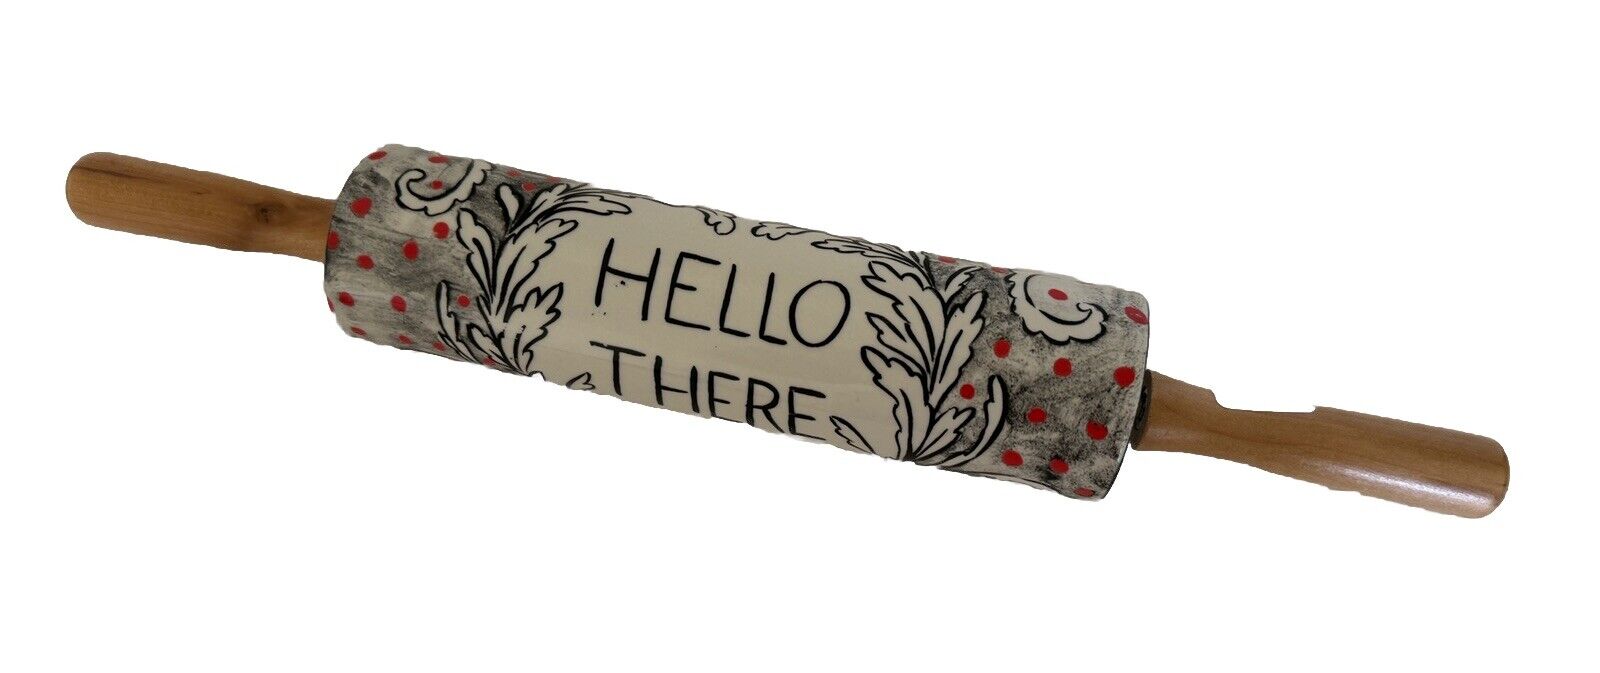 Anthropologie Dough Roll MOLLY HATCH Ceramic ROLLING PIN Wood Handle Hello There